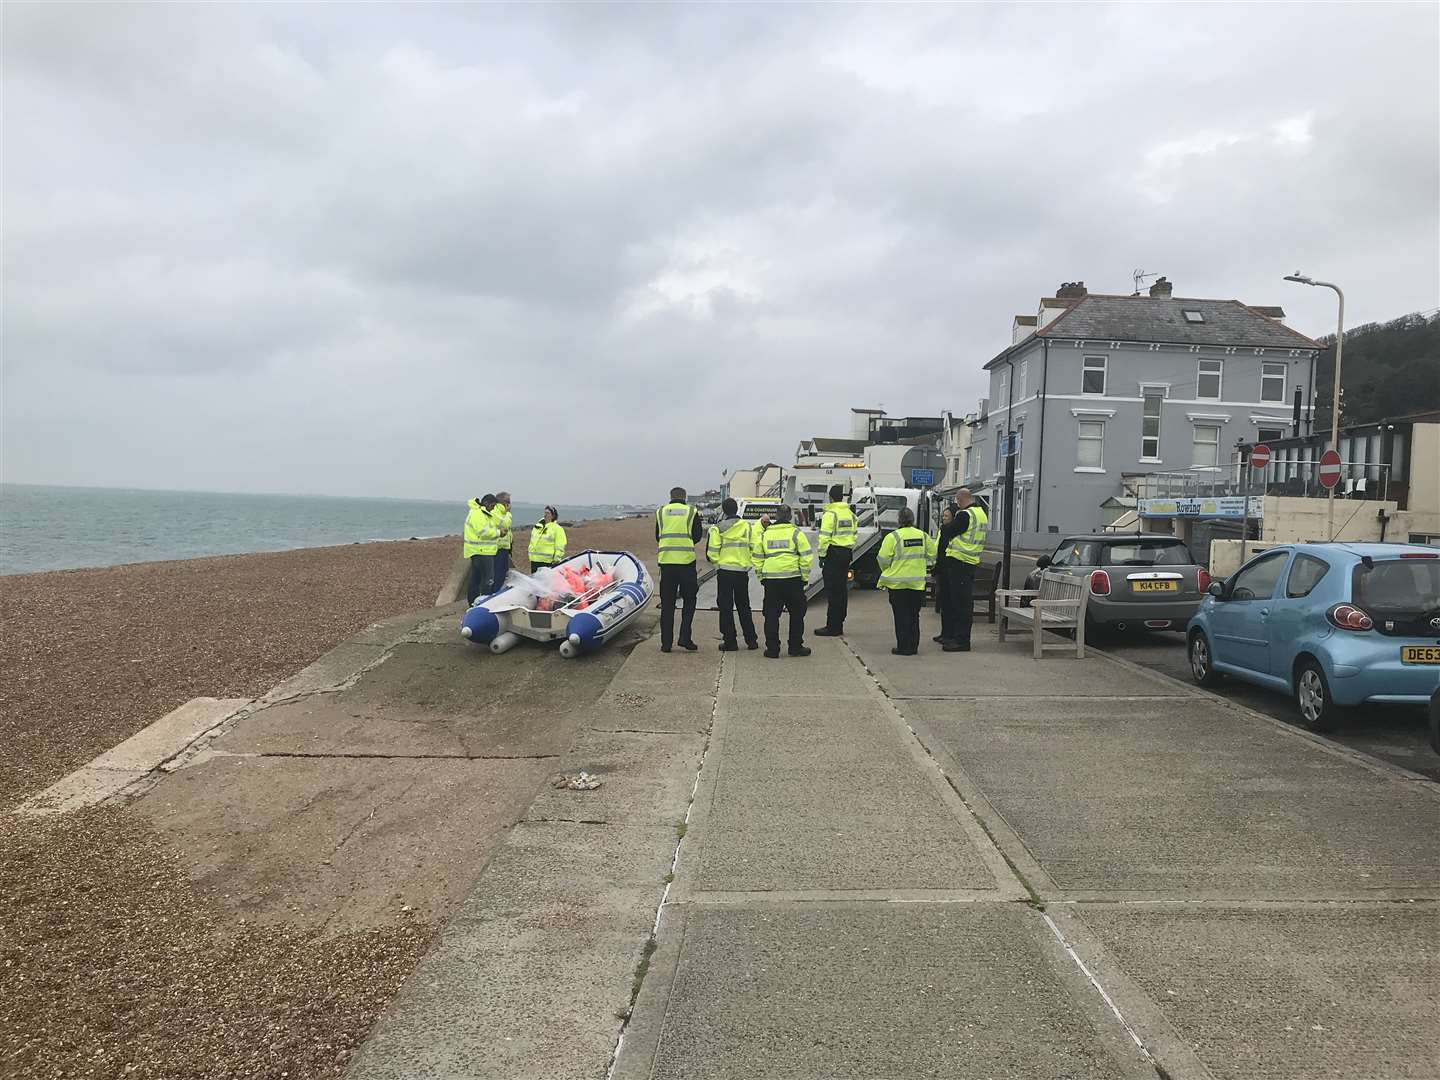 The dinghy was removed from the beach. Photo: James Woolford